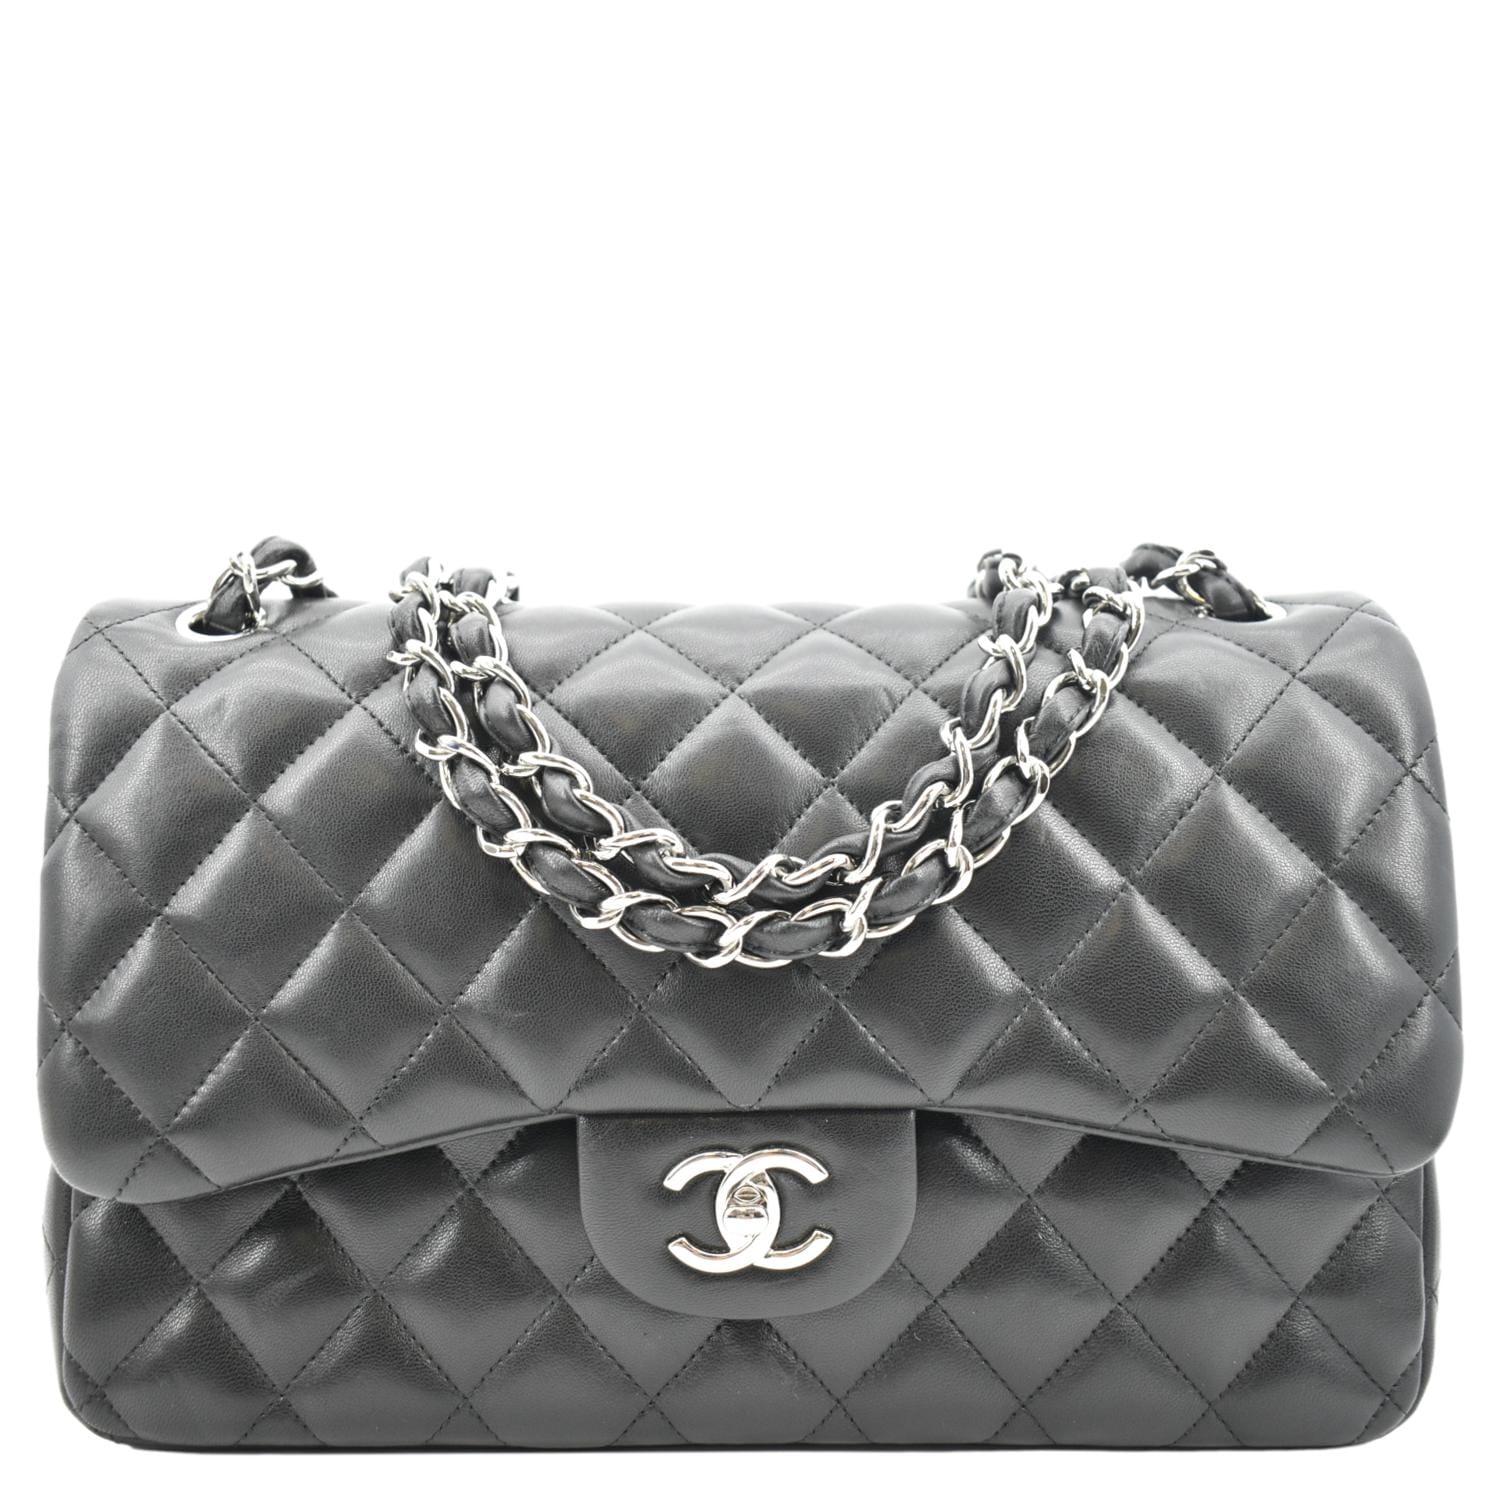 Chanel Pre-owned 2005-2006 Medium Classic Double Flap Shoulder Bag - White